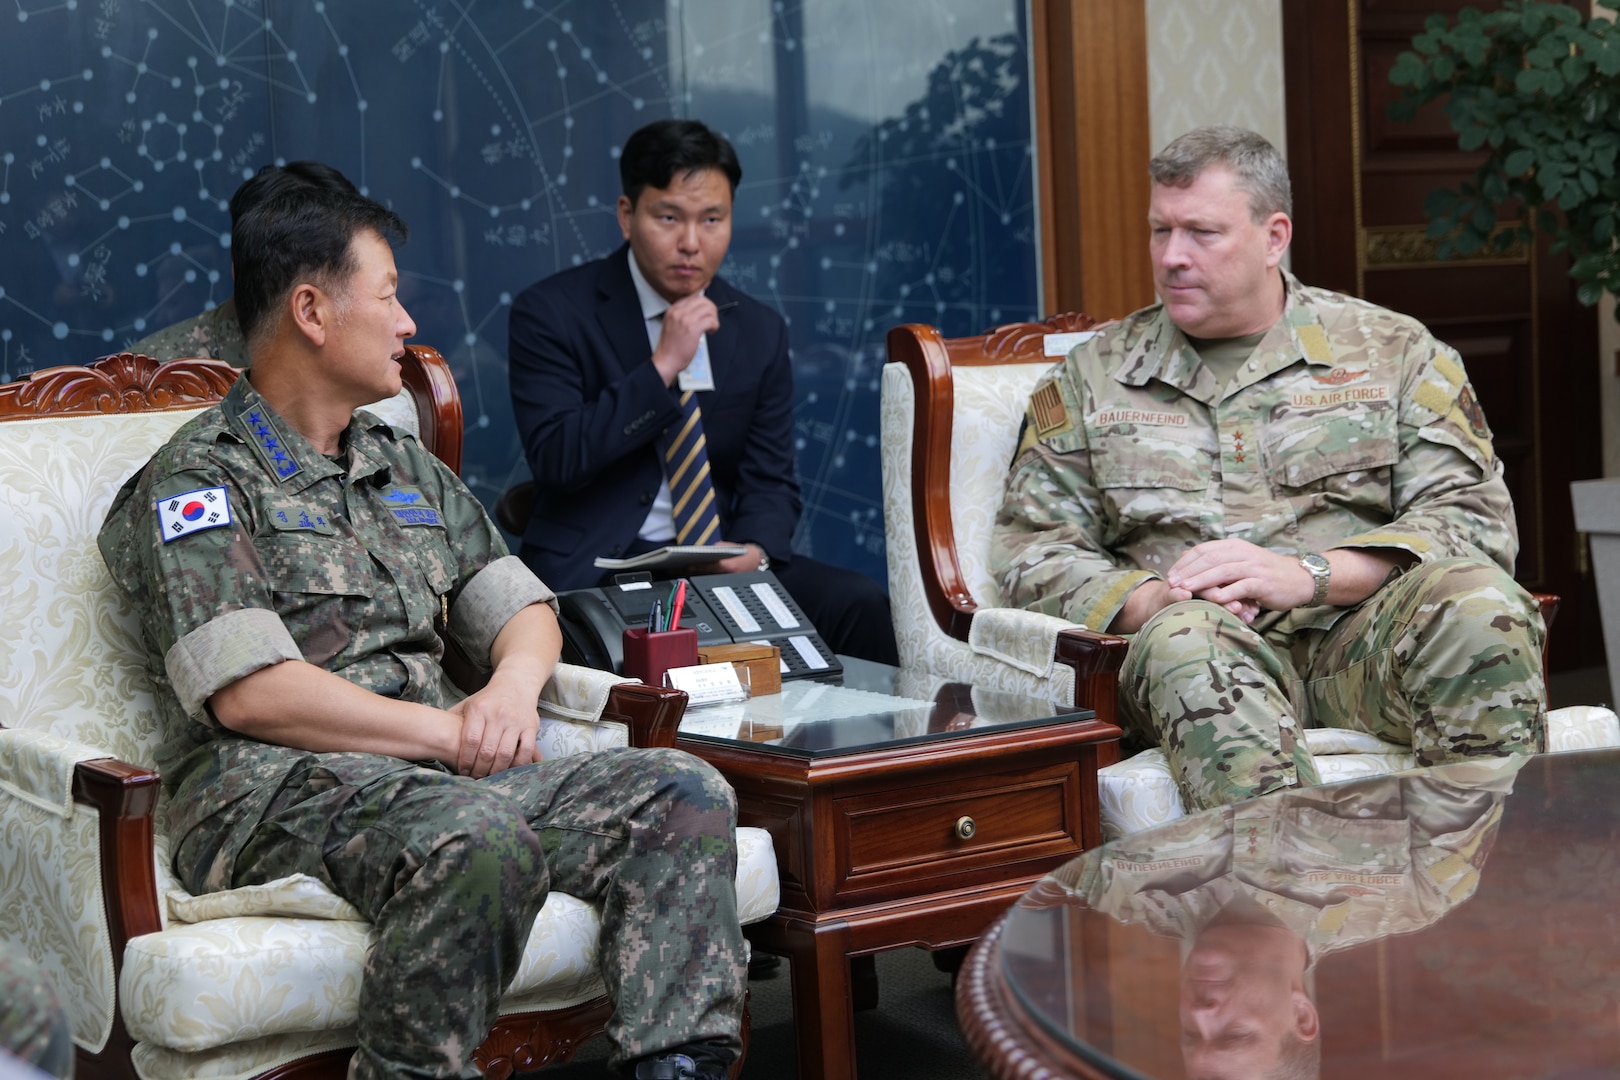 Republic of Korea Air Force Gen. Sang-hwa Jung, Chief of Staff of the Air Force, highlights the unique capabilities of his forces for U.S. Air Force Lt. Gen. Tony Bauernfeind, Air Force Special Operations Command commander, at the ROKAF headquarters in Korea on July 13, 2023. The two leaders focused much of their discussion on the iron-clad, 70-year-old ROK-U.S. Alliance and the need to adapt to evolving threats in the region. (U.S. Air Force photo by Maj. Christopher Mesnard)